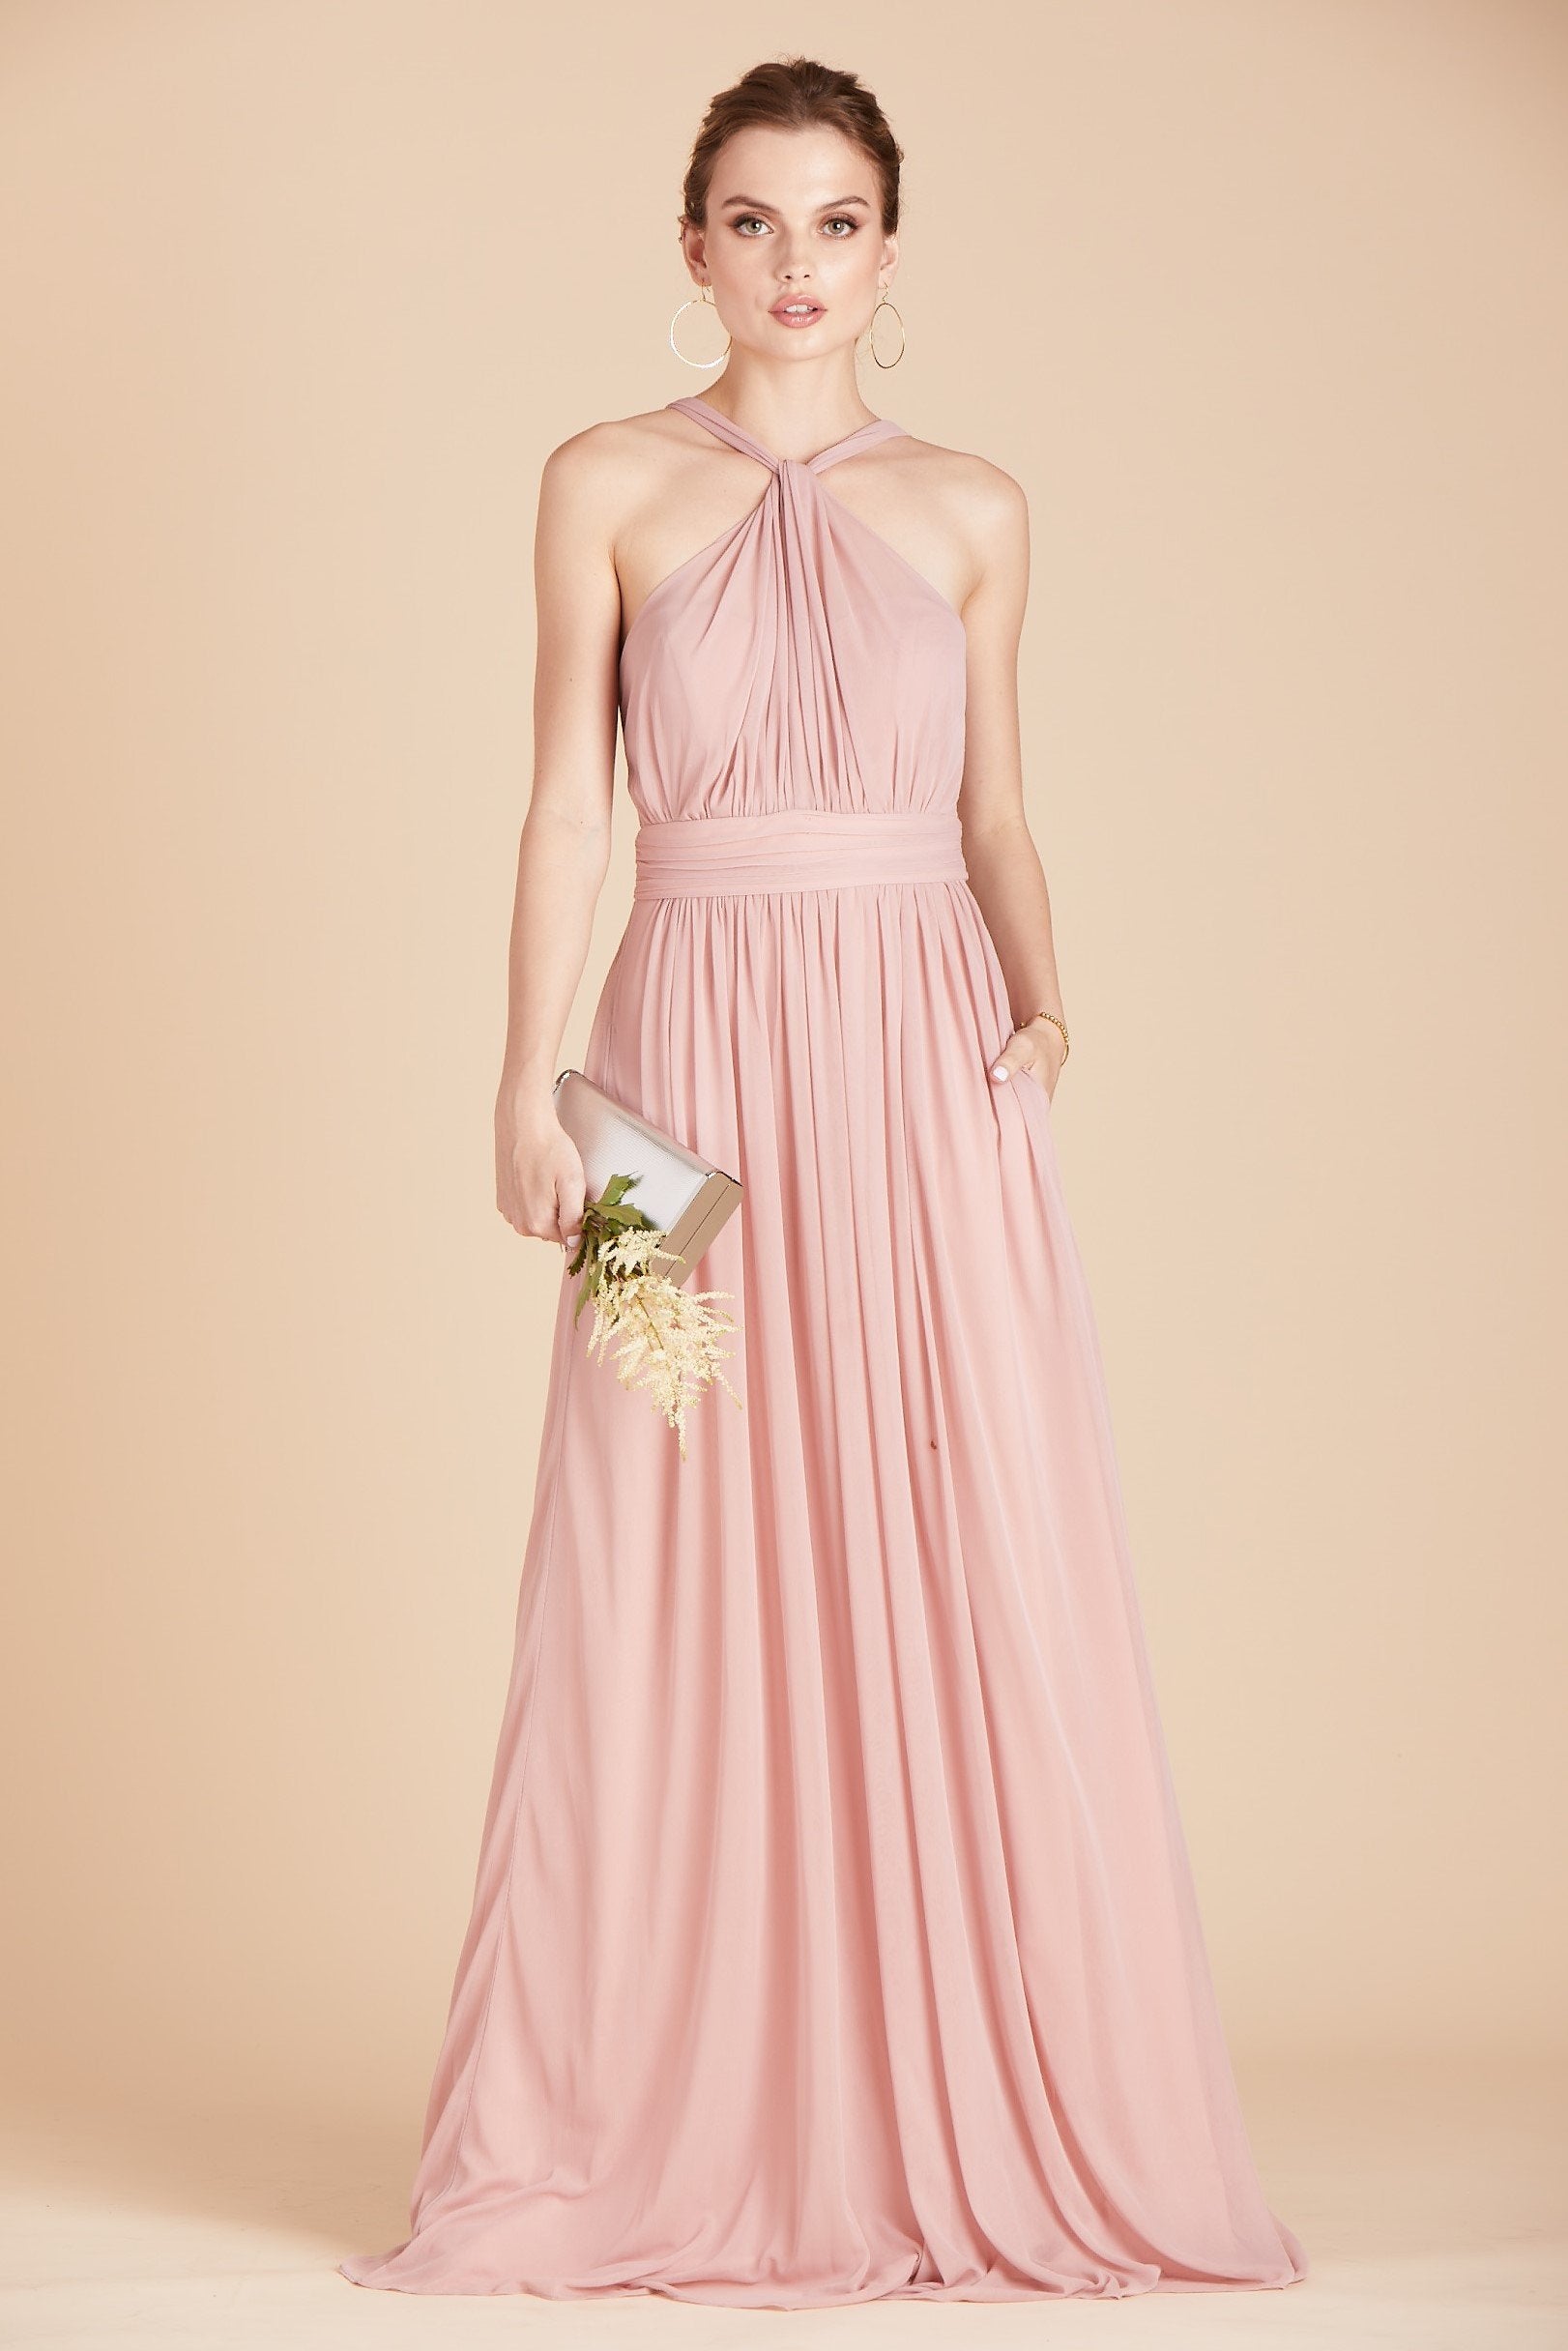 Kiko bridesmaid dress in dusty rose chiffon by Birdy Grey, front view with hand in pocket